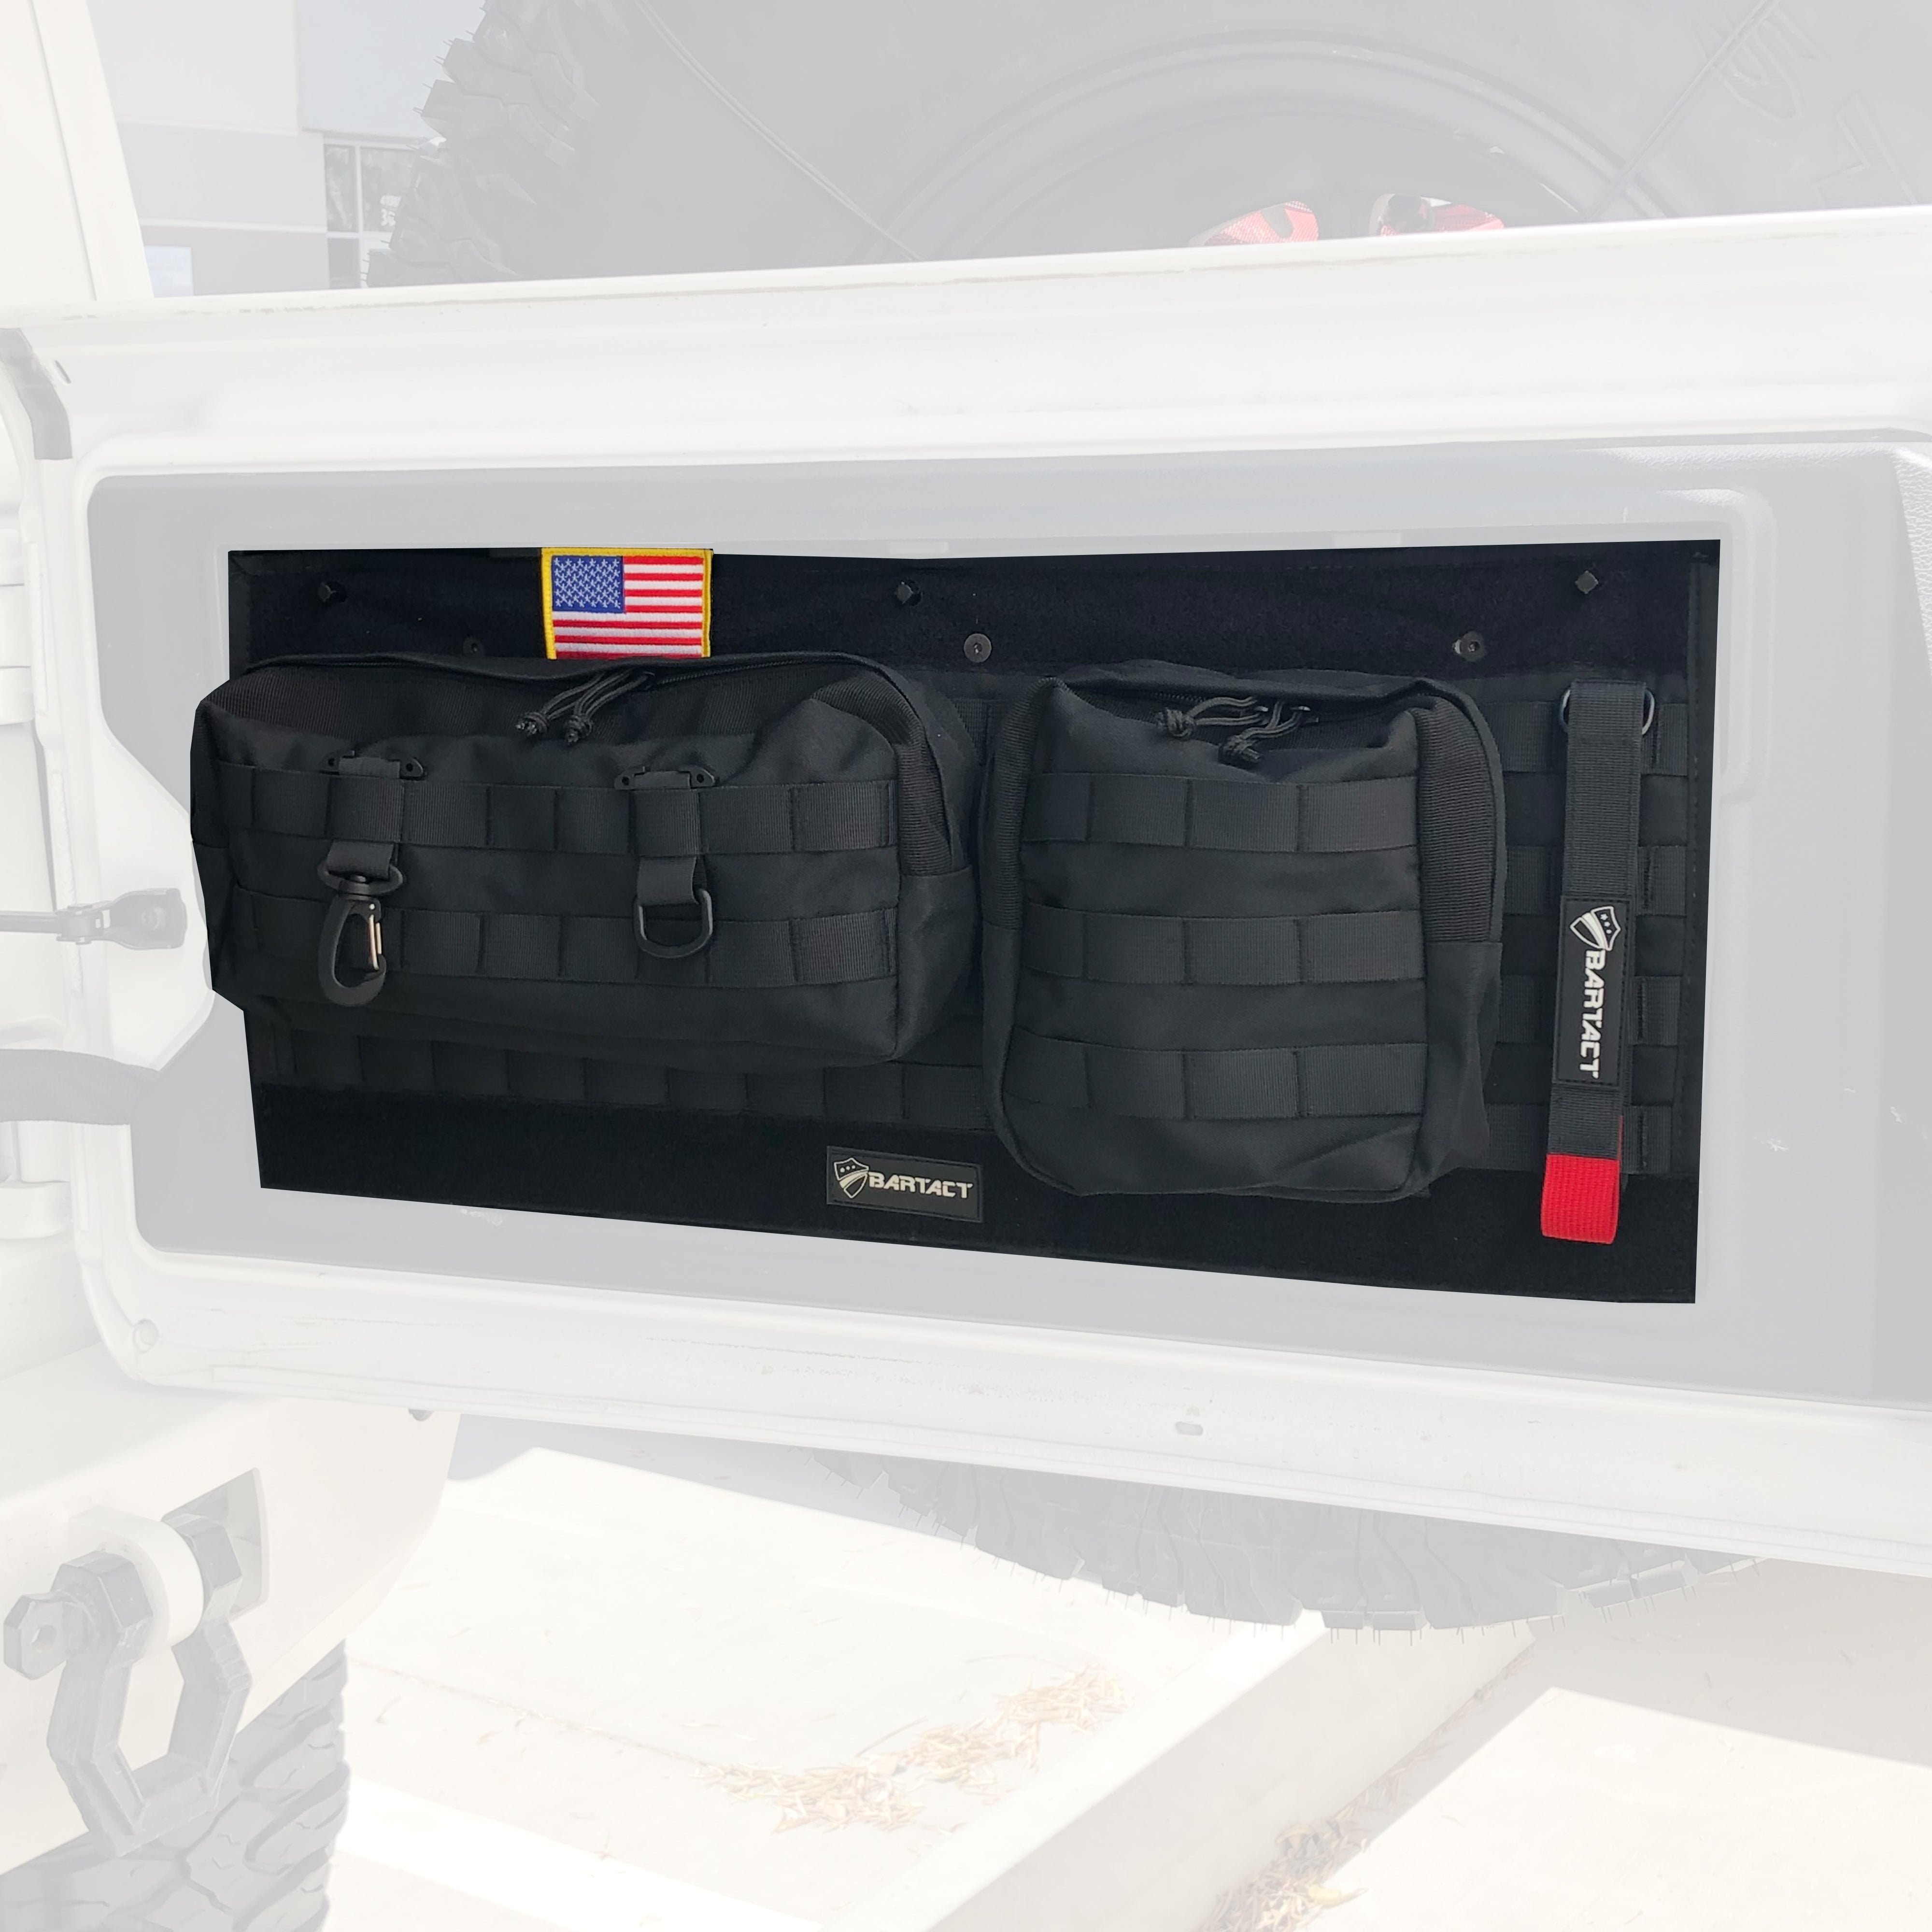 Tailgate Molle Panel Kit with Pouches for 18-22 Jeep Wrangler JL/JLU Bartact - JLIATGMK1-B - Bartact